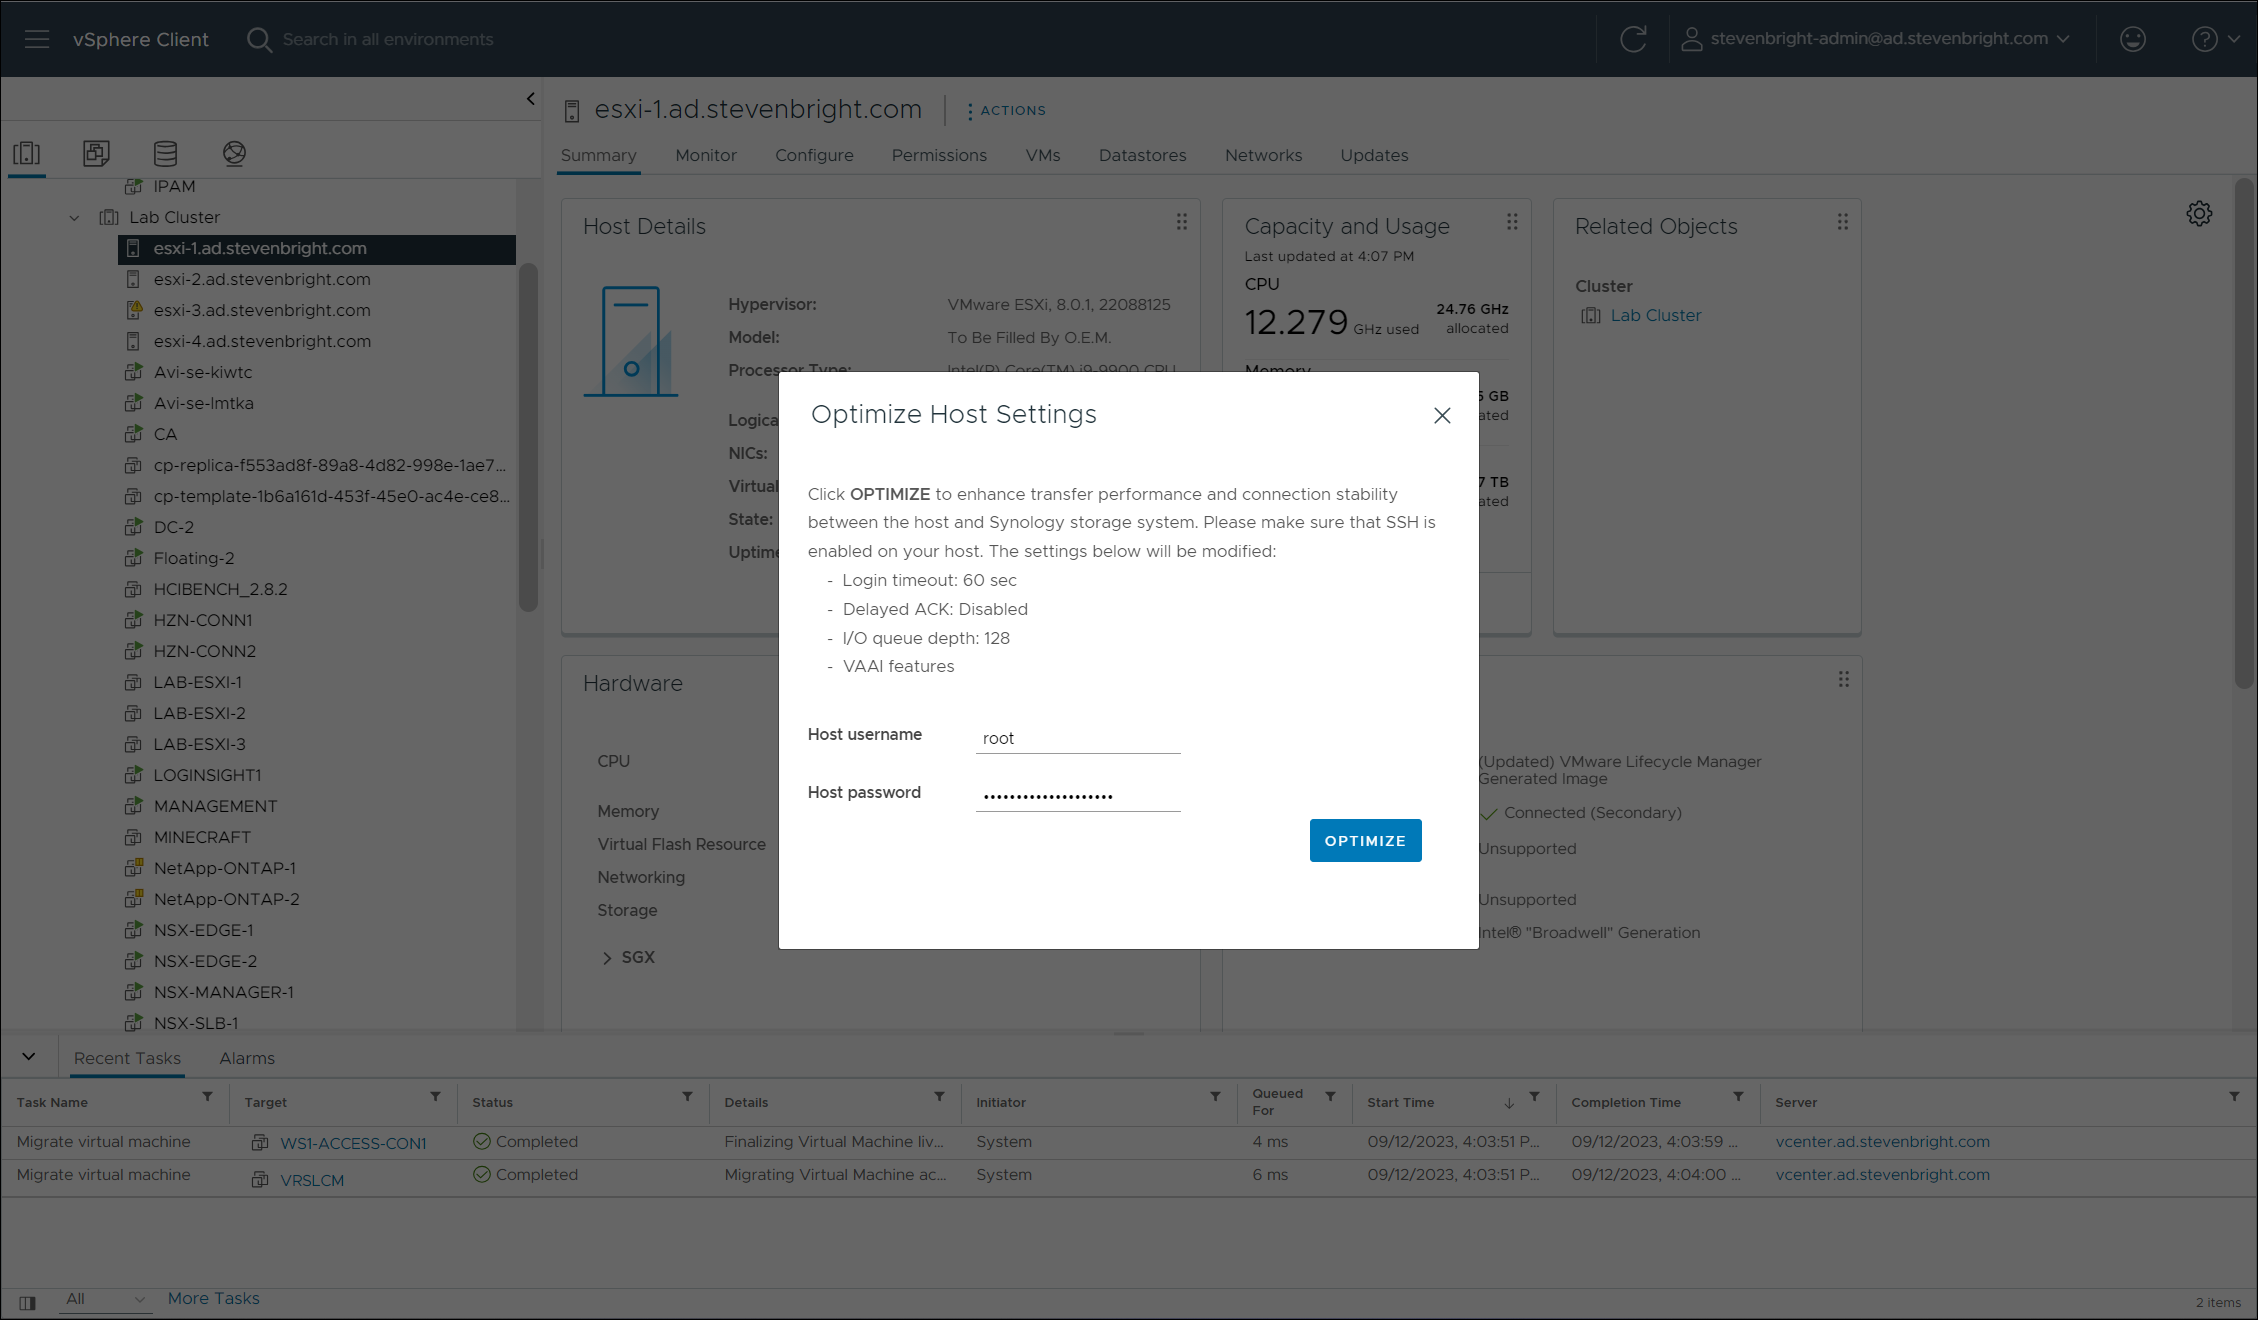 VMware vSphere Client - Synology Storage Console Optimize Host Settings Dialog